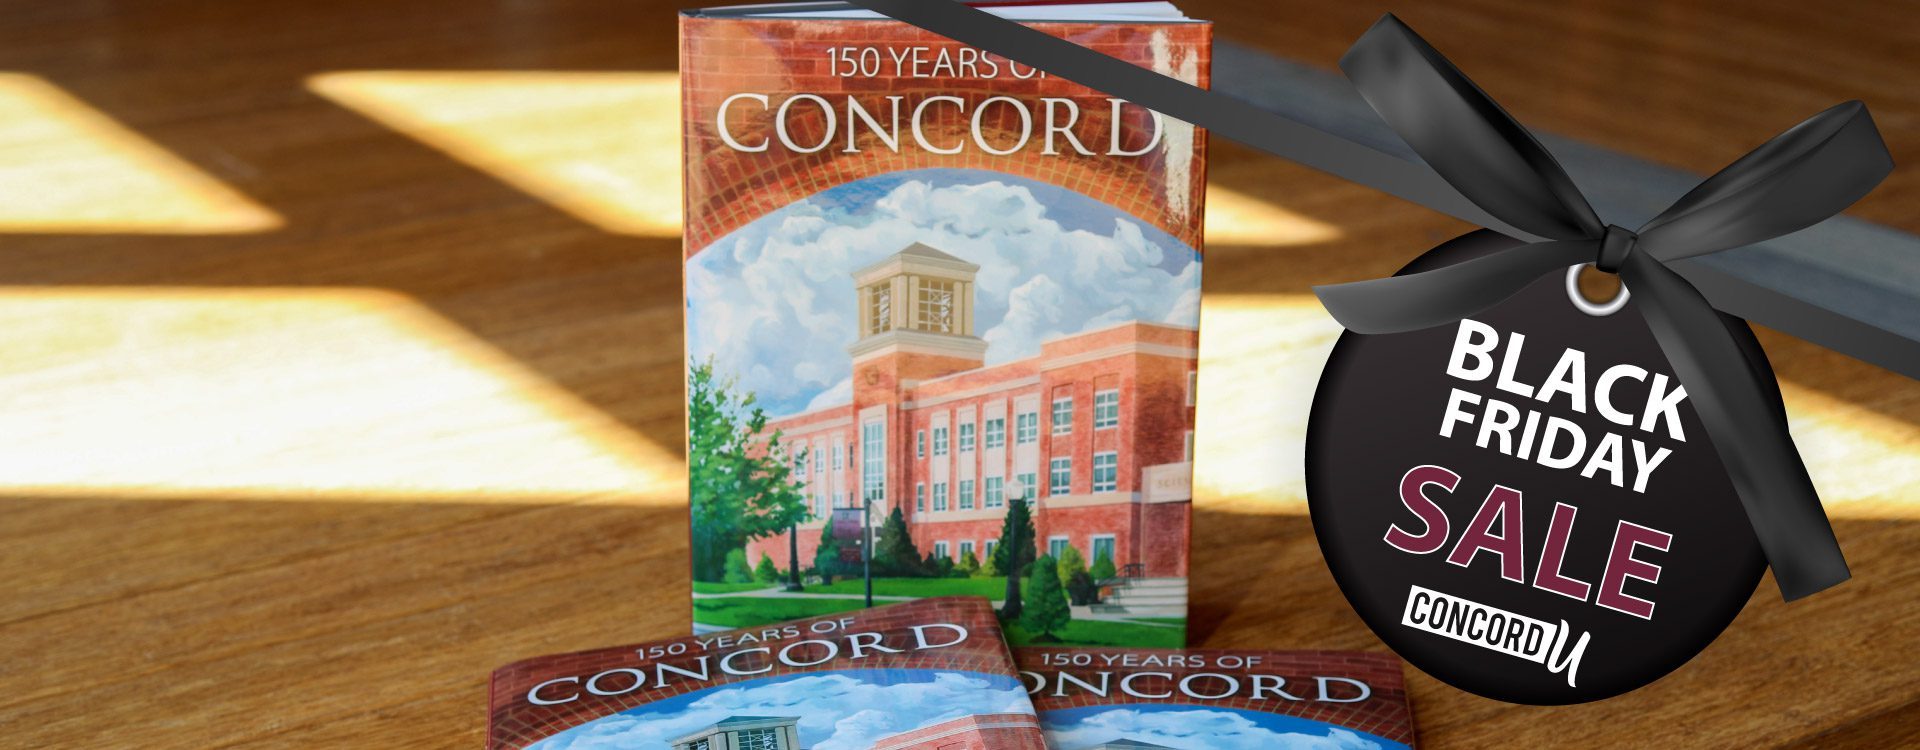 Black Friday Sale on the 150 Years of Concord book.